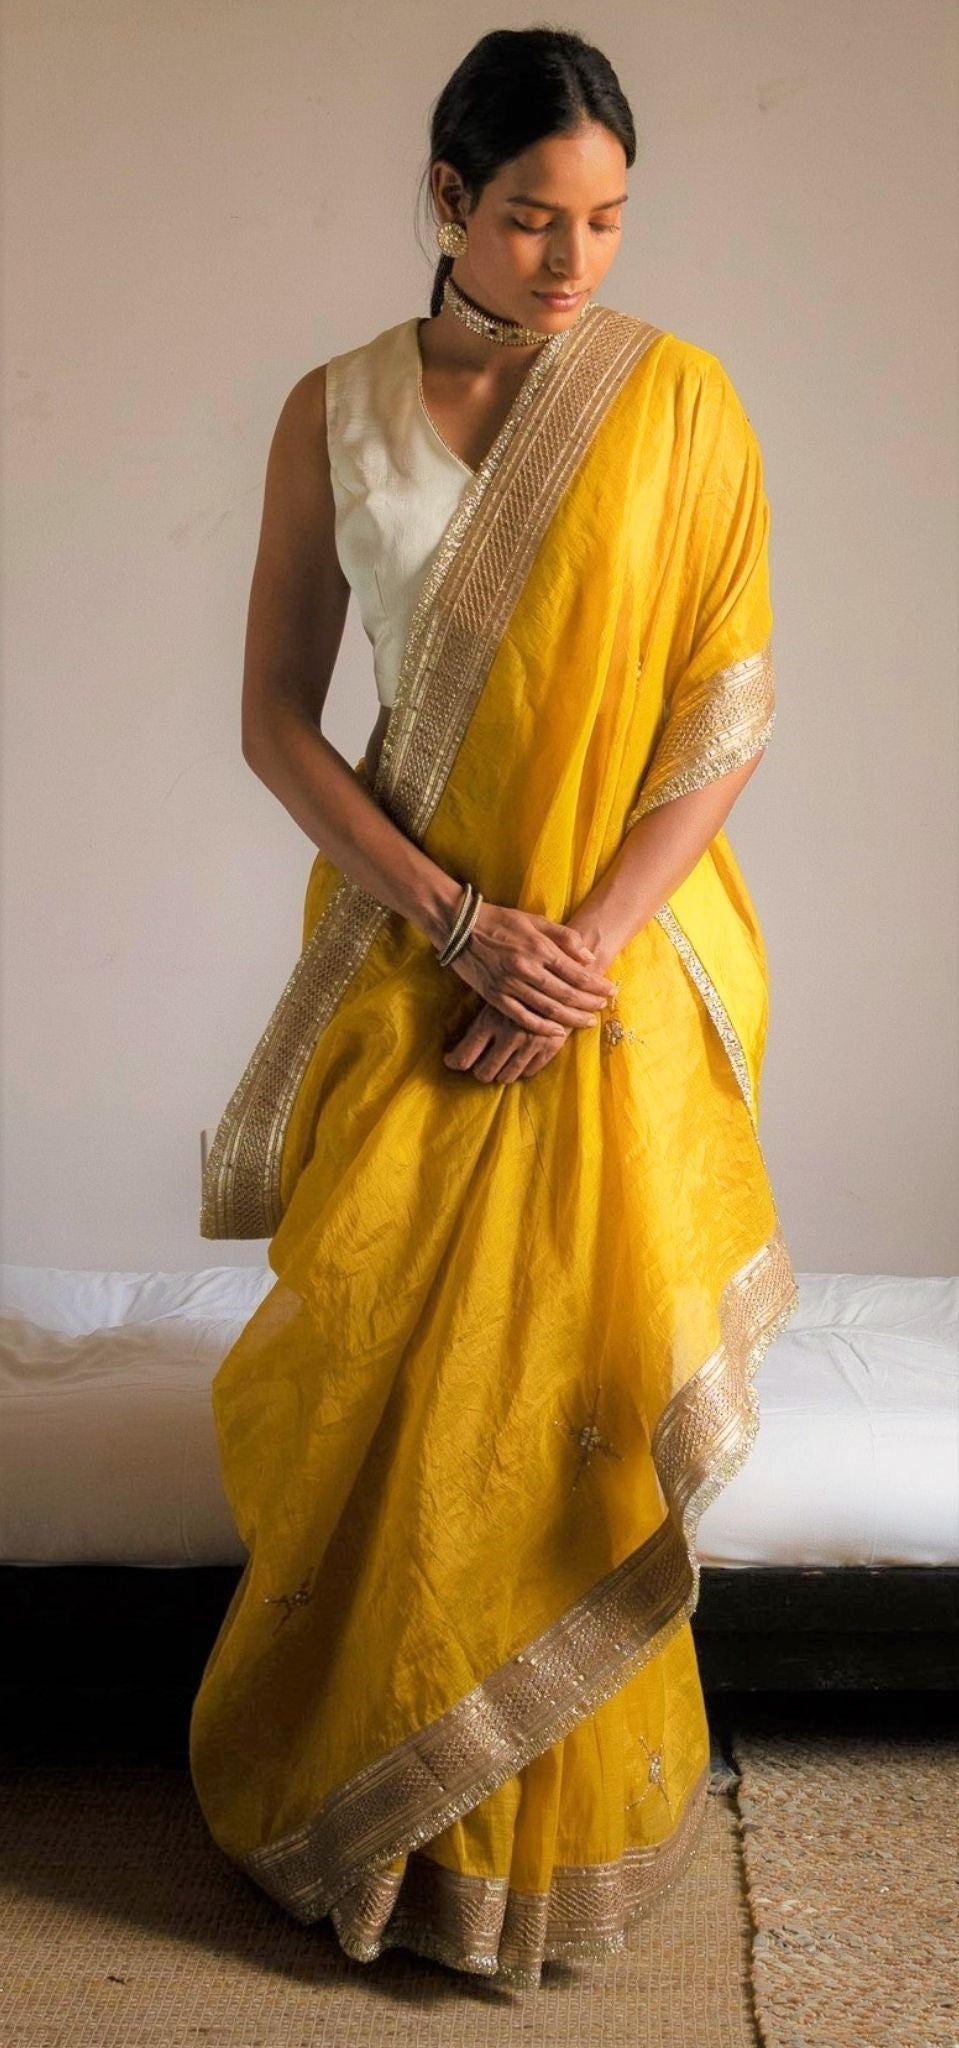 Saree hand embroidered in Yellow Handloom tissue